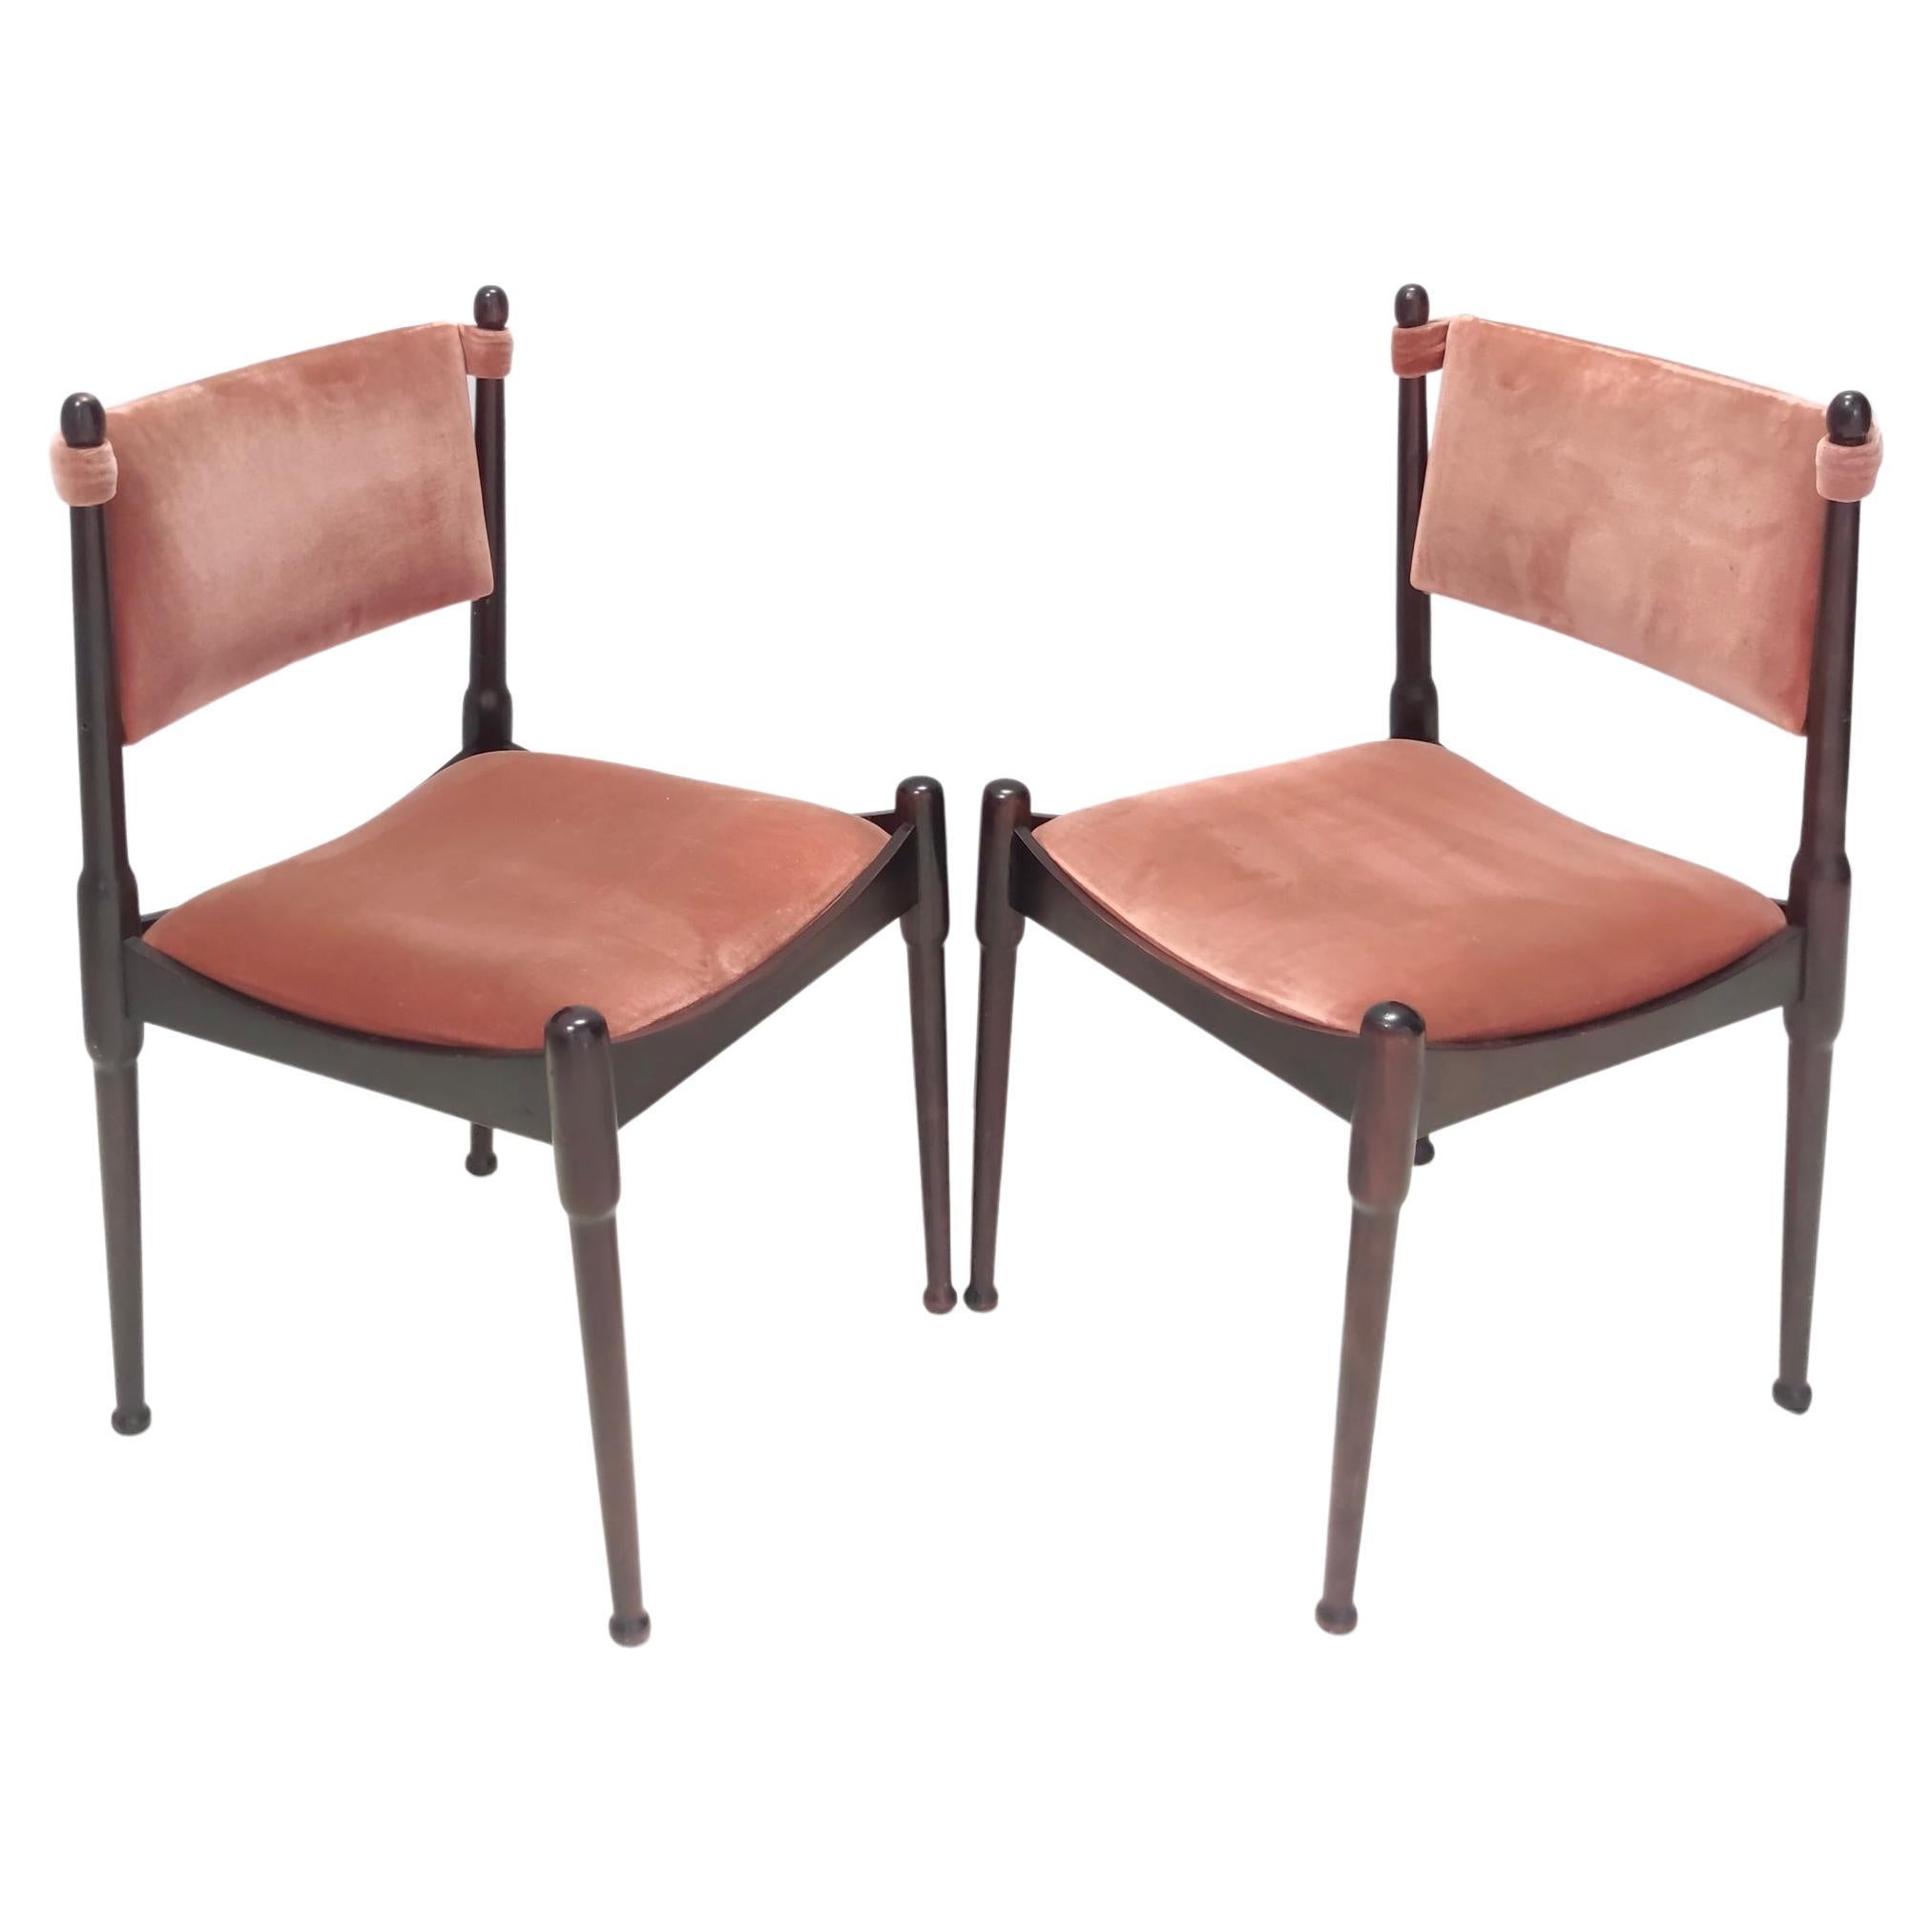 Pair of Salmon Pink Velvet Side Chairs Ascribable to Silvio Coppola, Italy